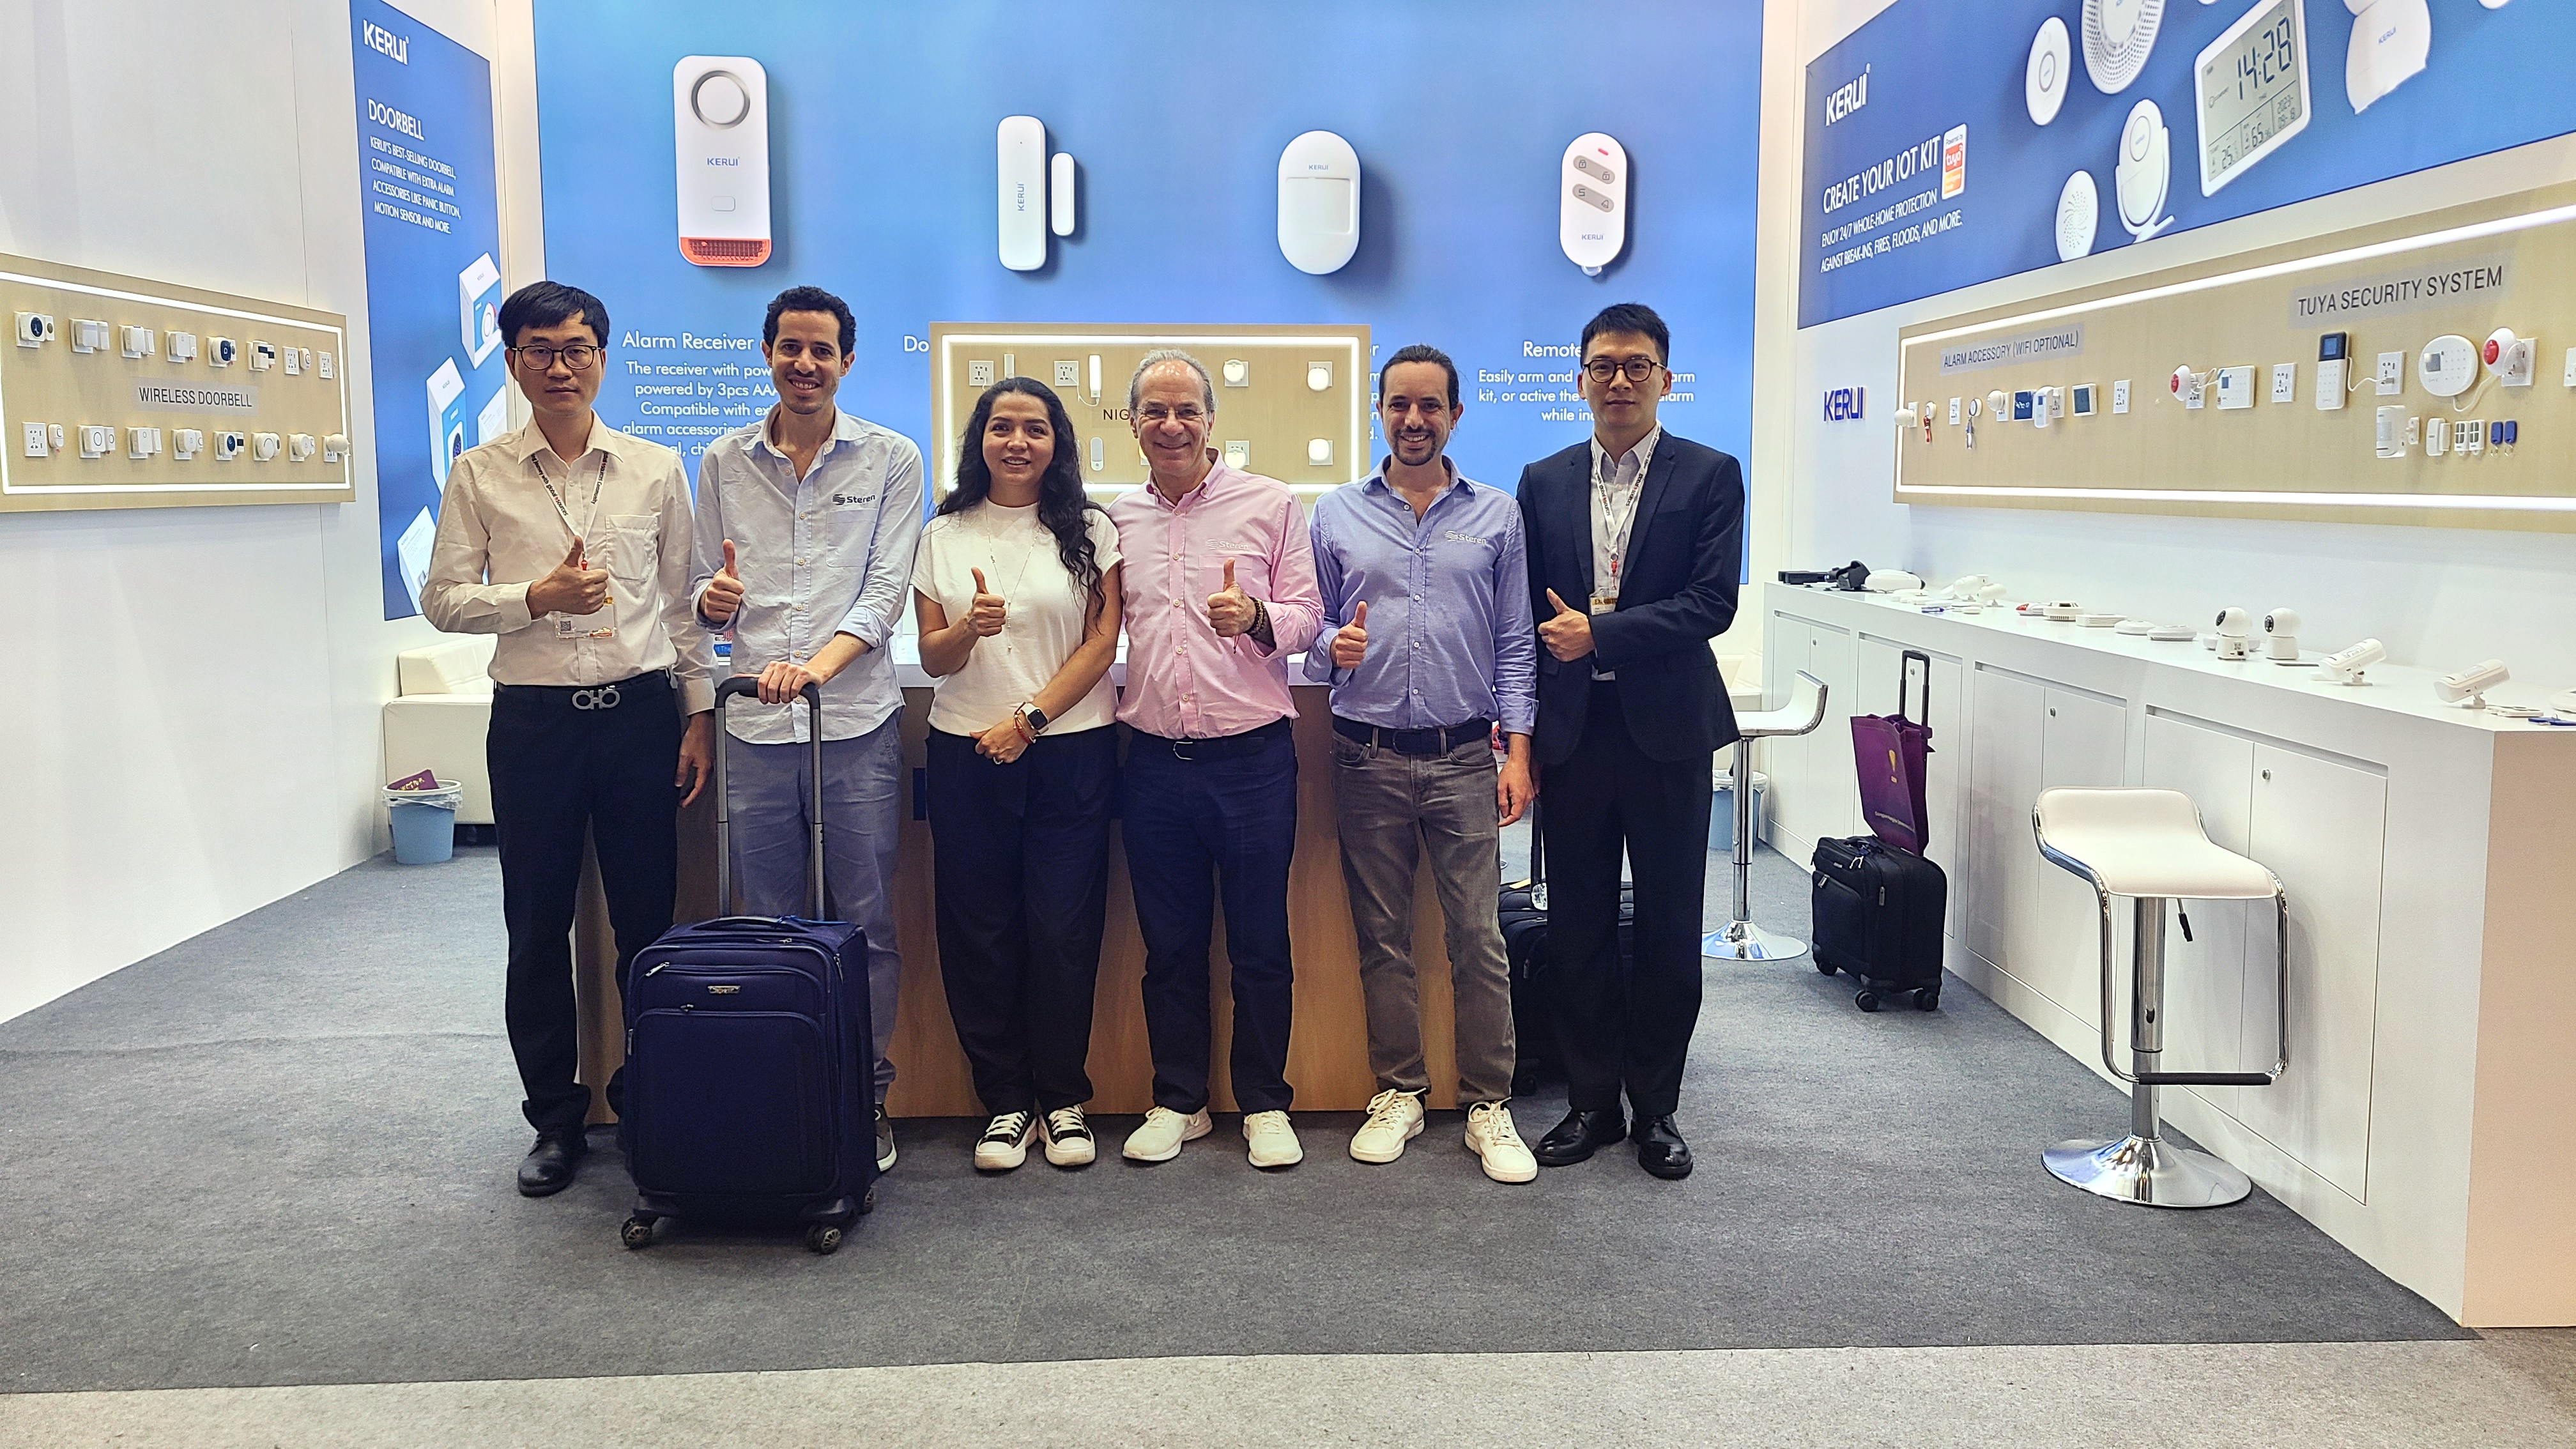 October Autumn Fair Ends: Global Sources Hong Kong Smart Home & Security Fair ends on October 21st with 5,000 quality exhibitors and buyers from all over the world! 